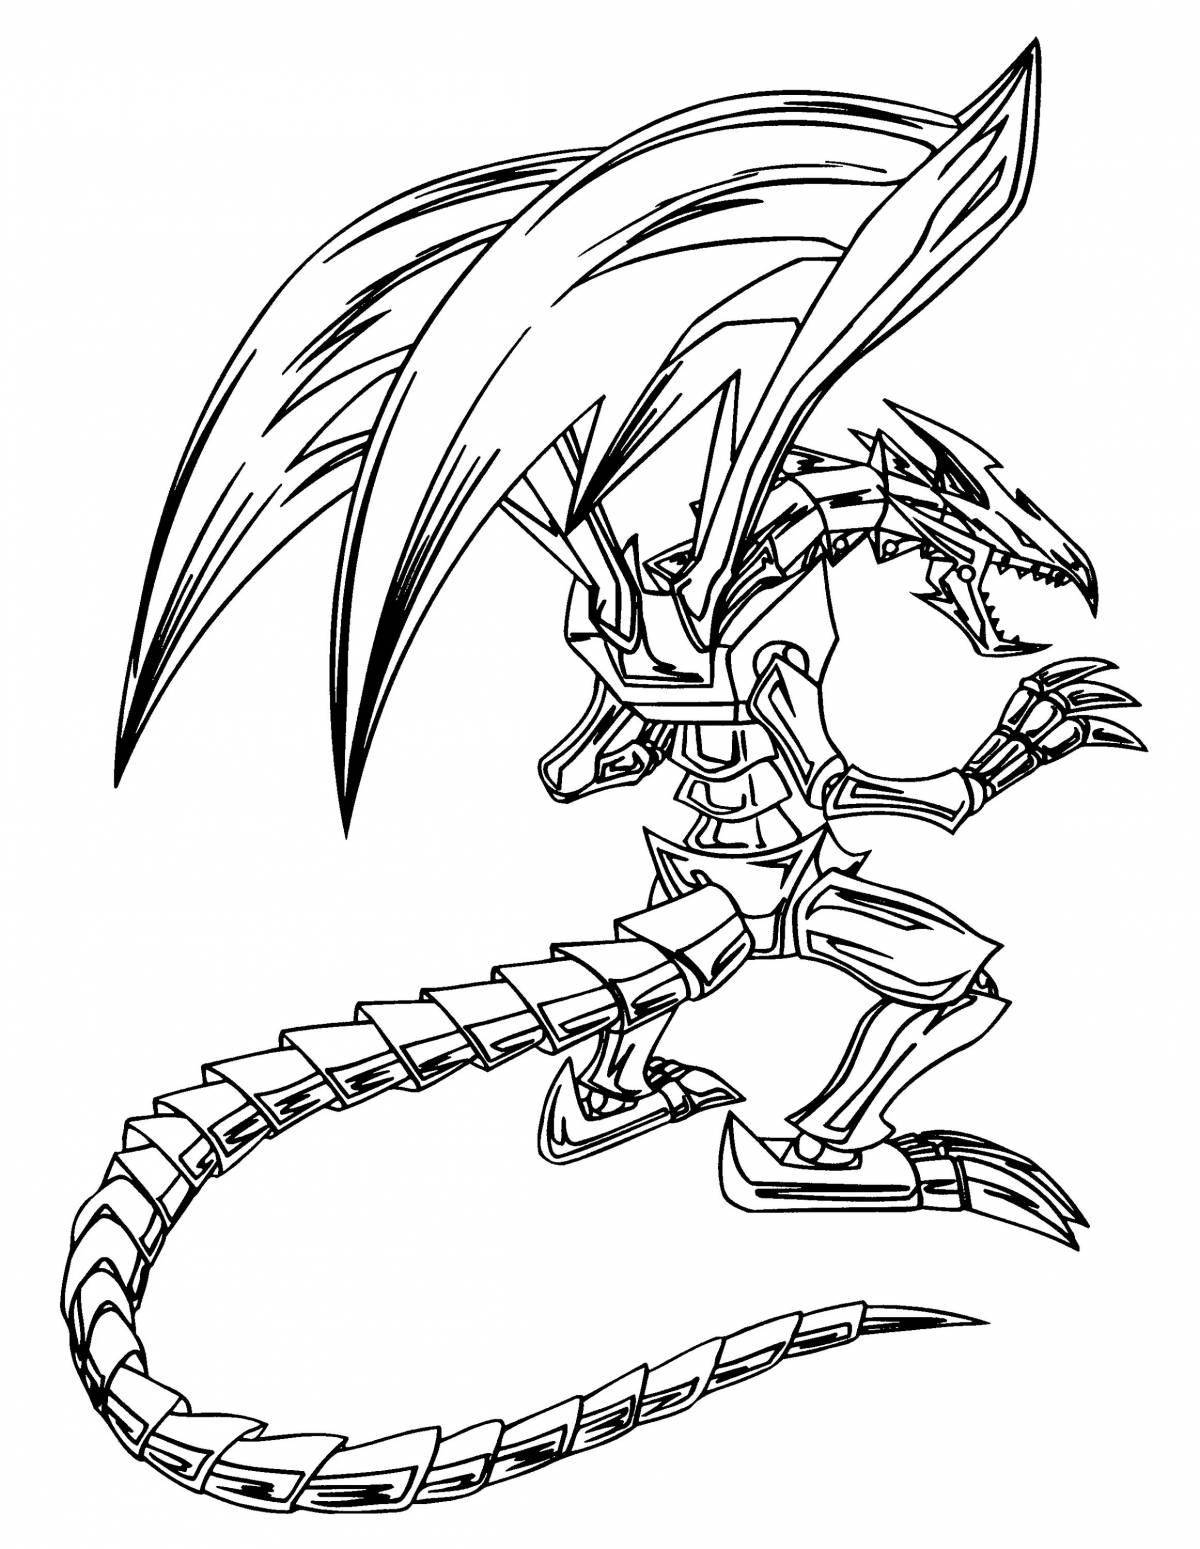 Outstanding screamers coloring page for boys